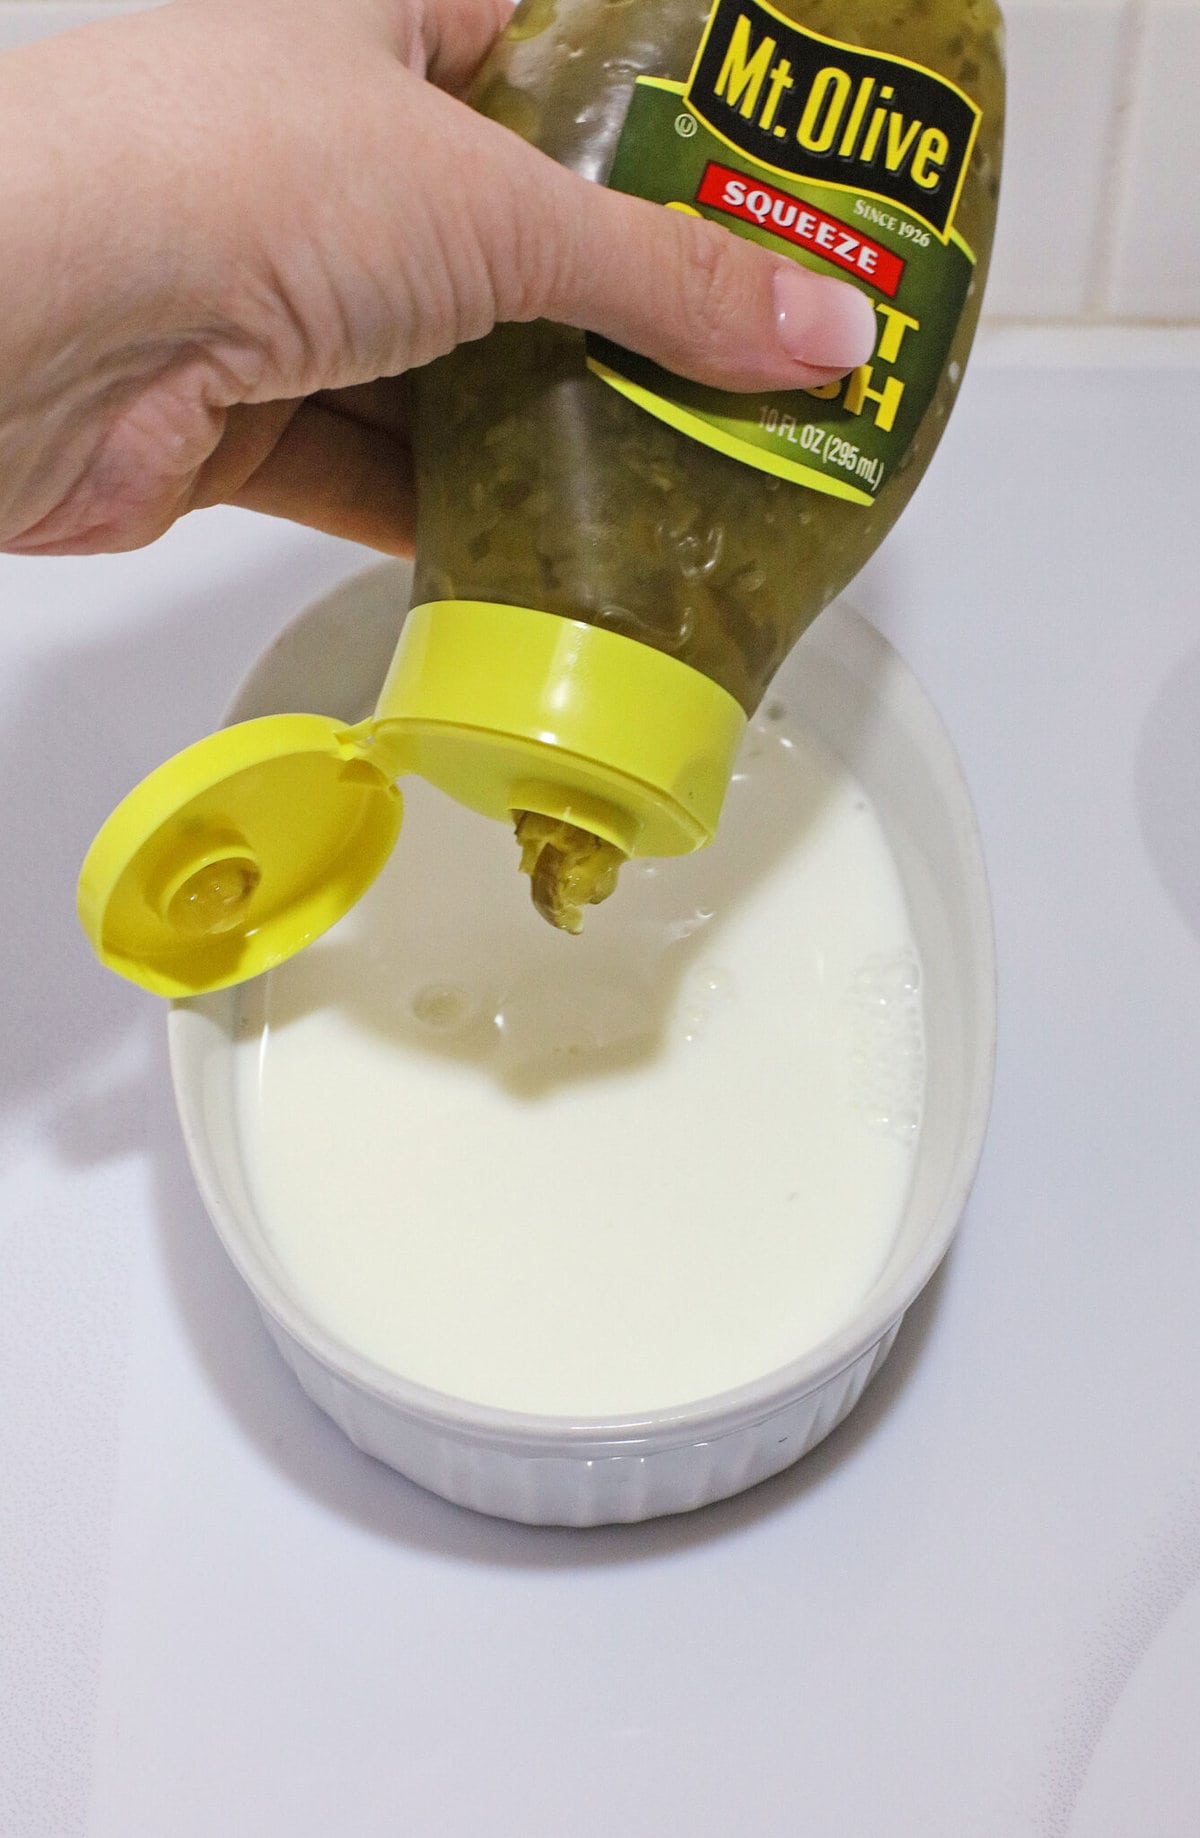 Adding the pickle juice into the milk.